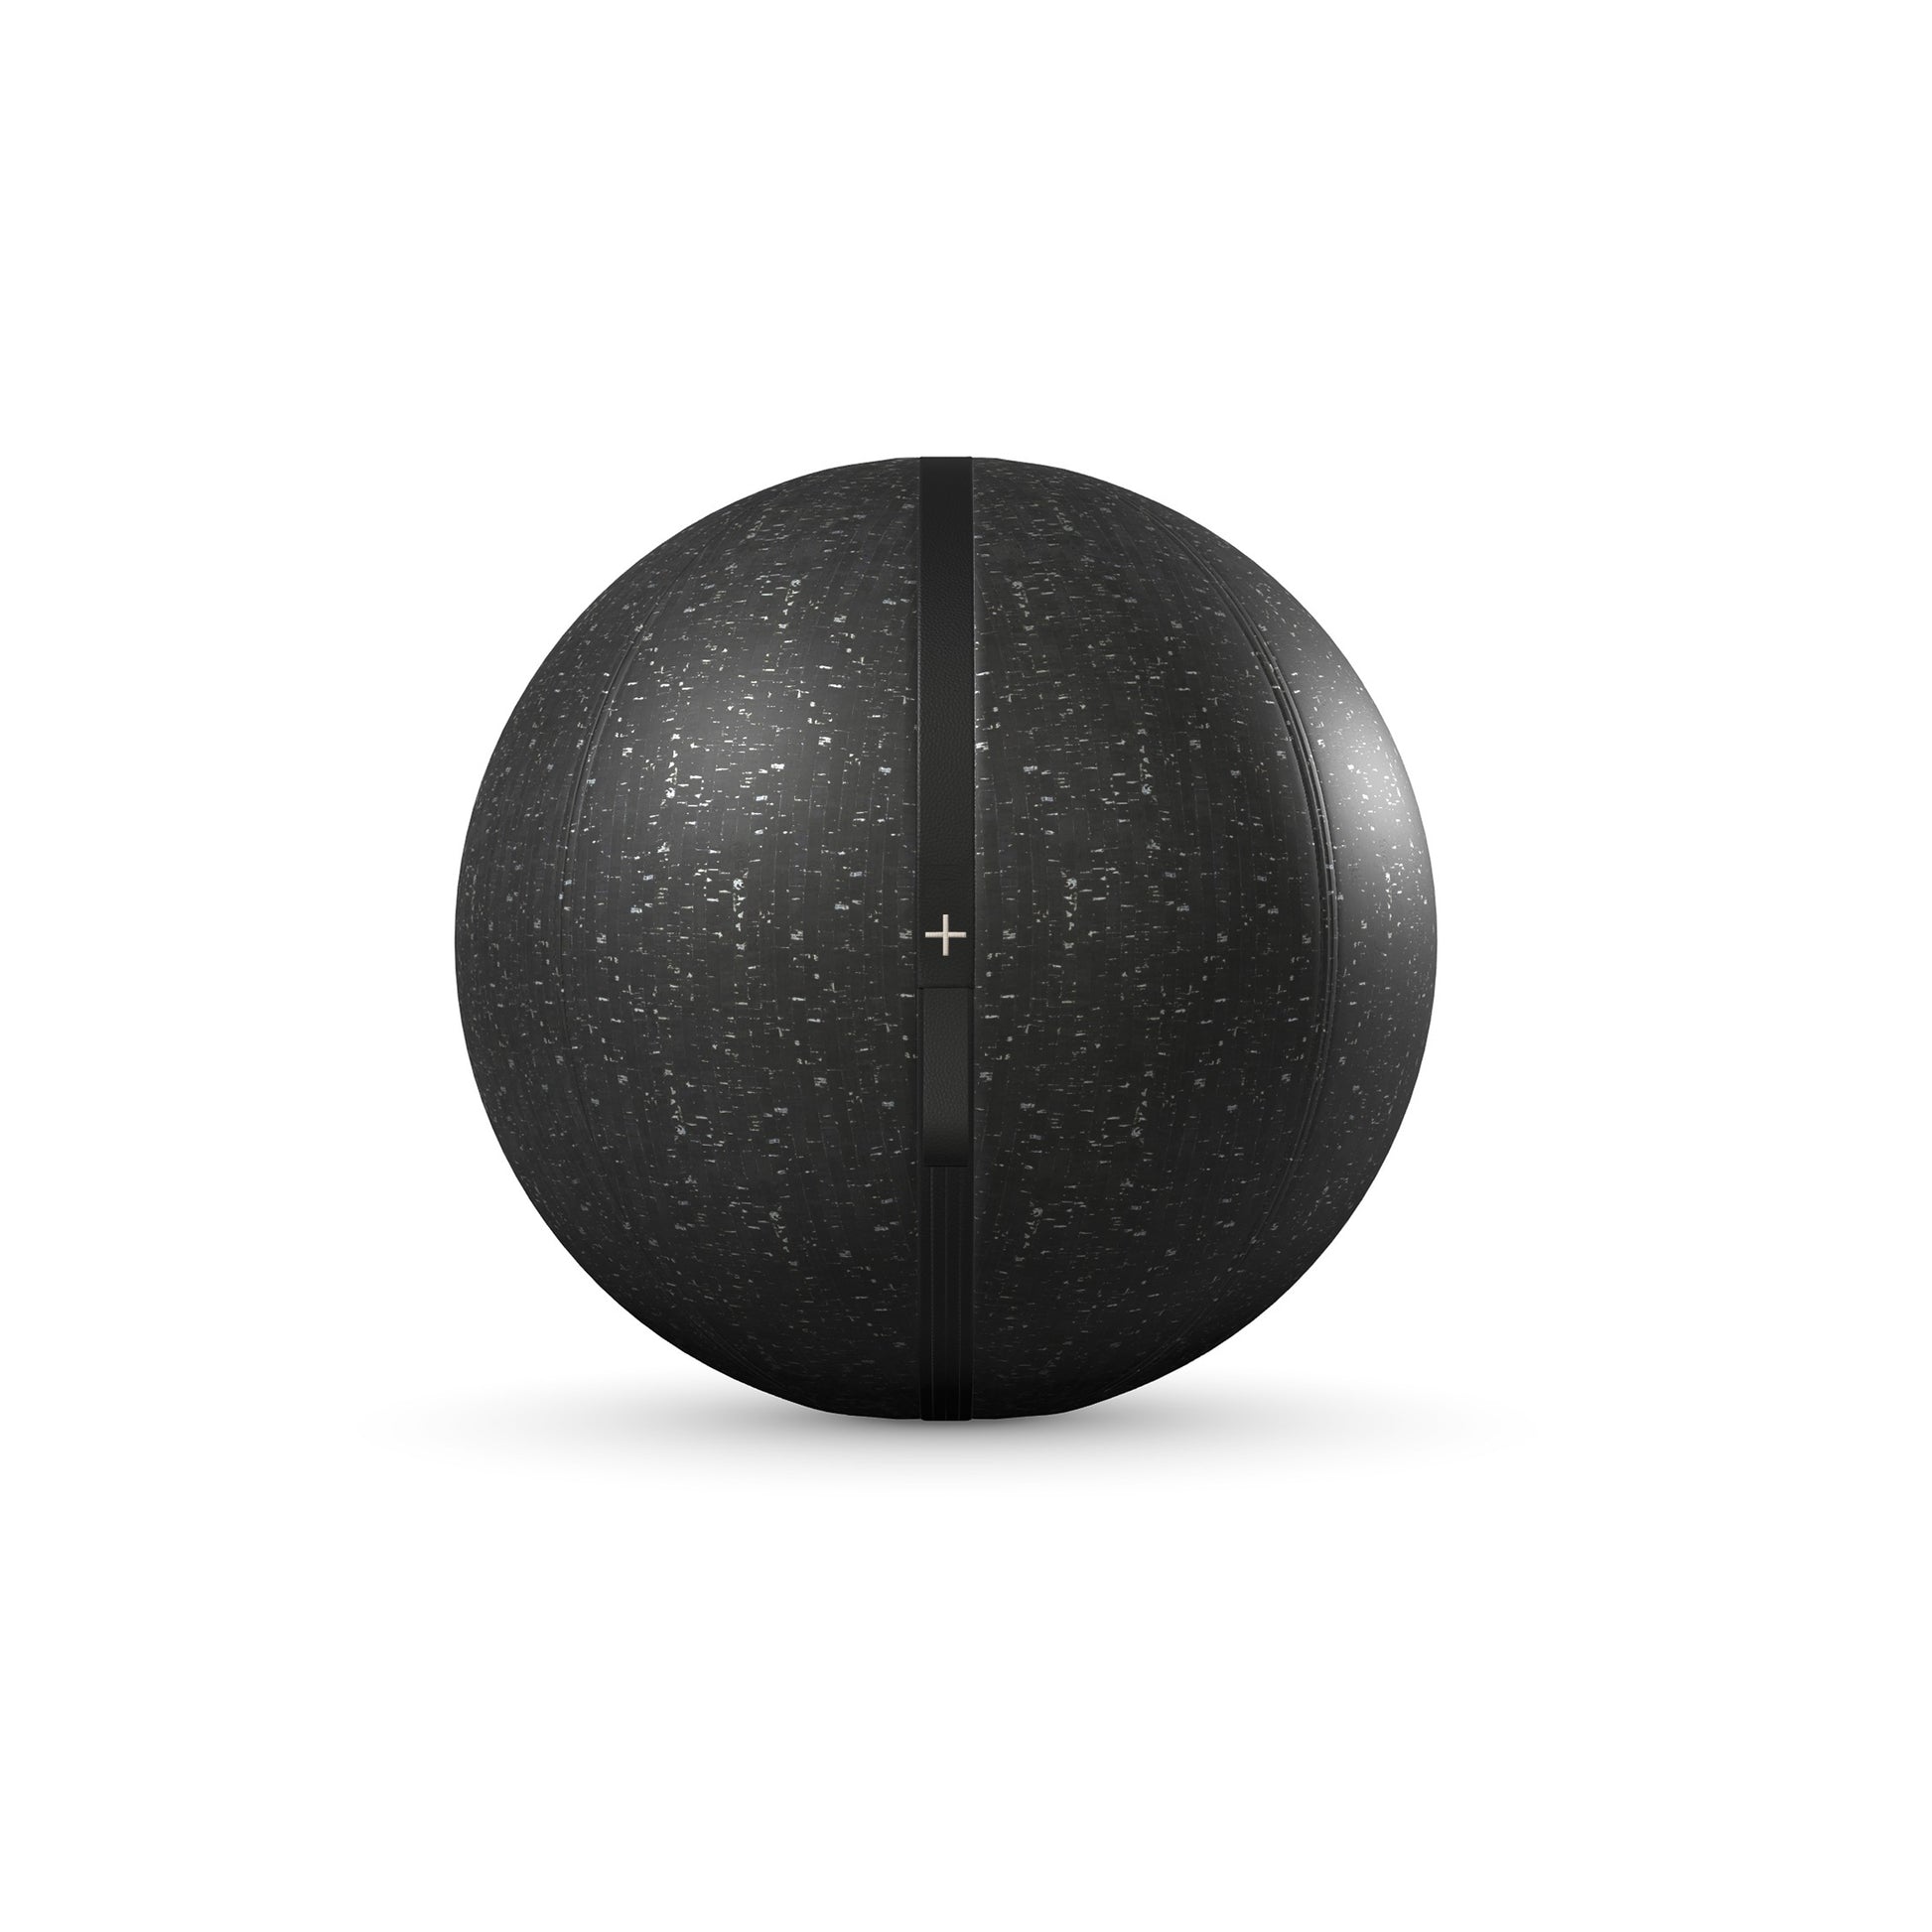 A Fitness Ball made of luxurious cork and leather, available in Singapore and Australia.